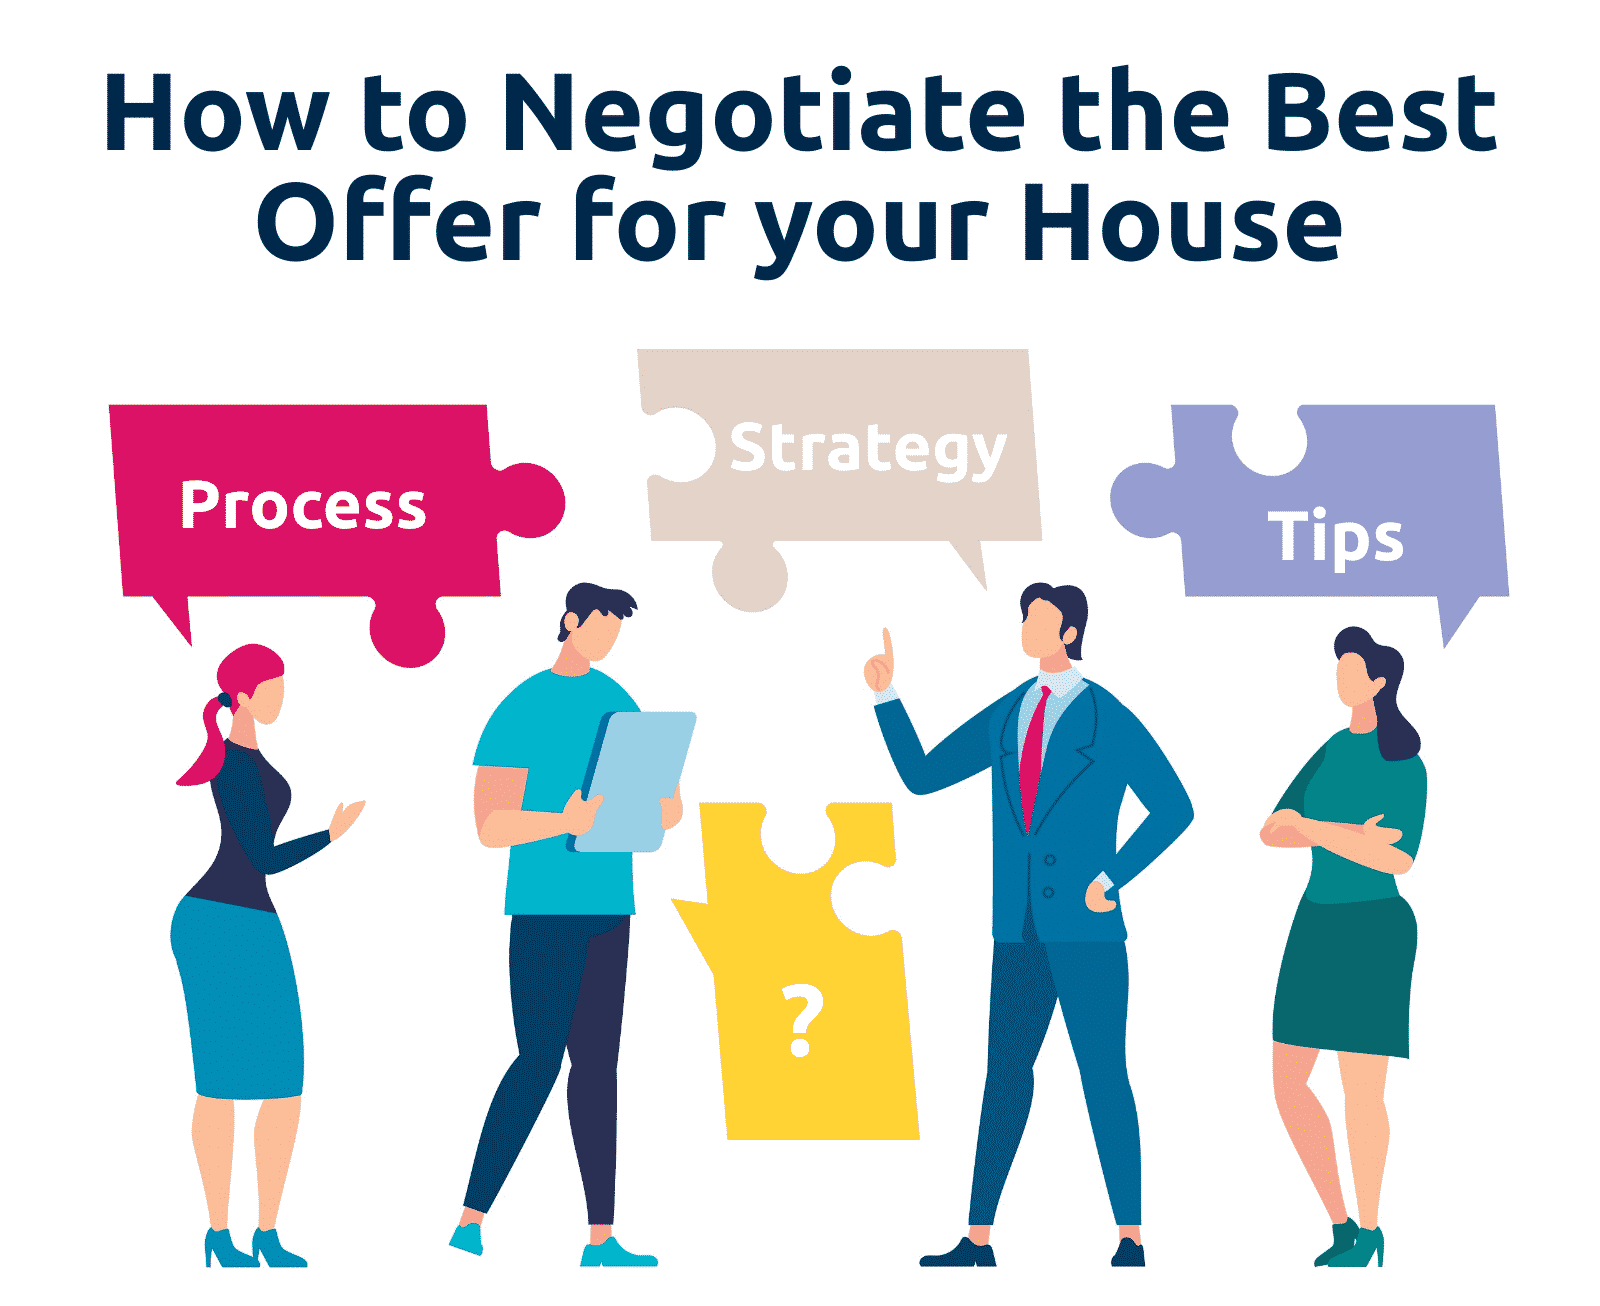 How to negotiate the best offer for your house (step by step guide)